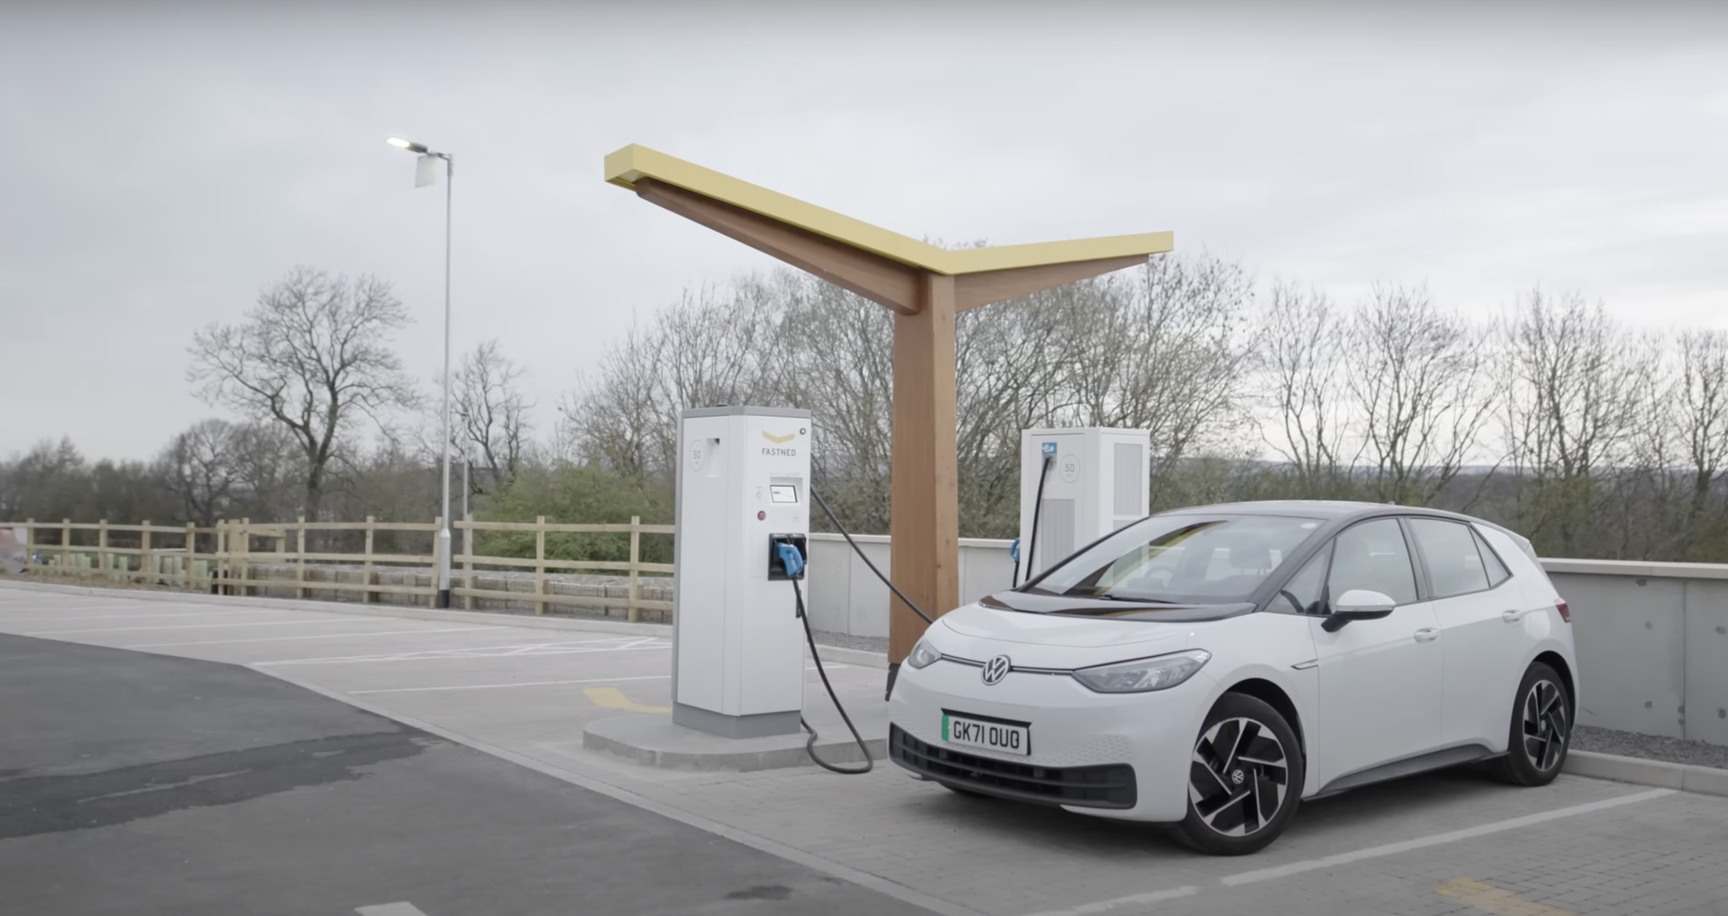 Image showing a Volkswagen ID.3 electric vehicle charging at a Fastned EV charging station